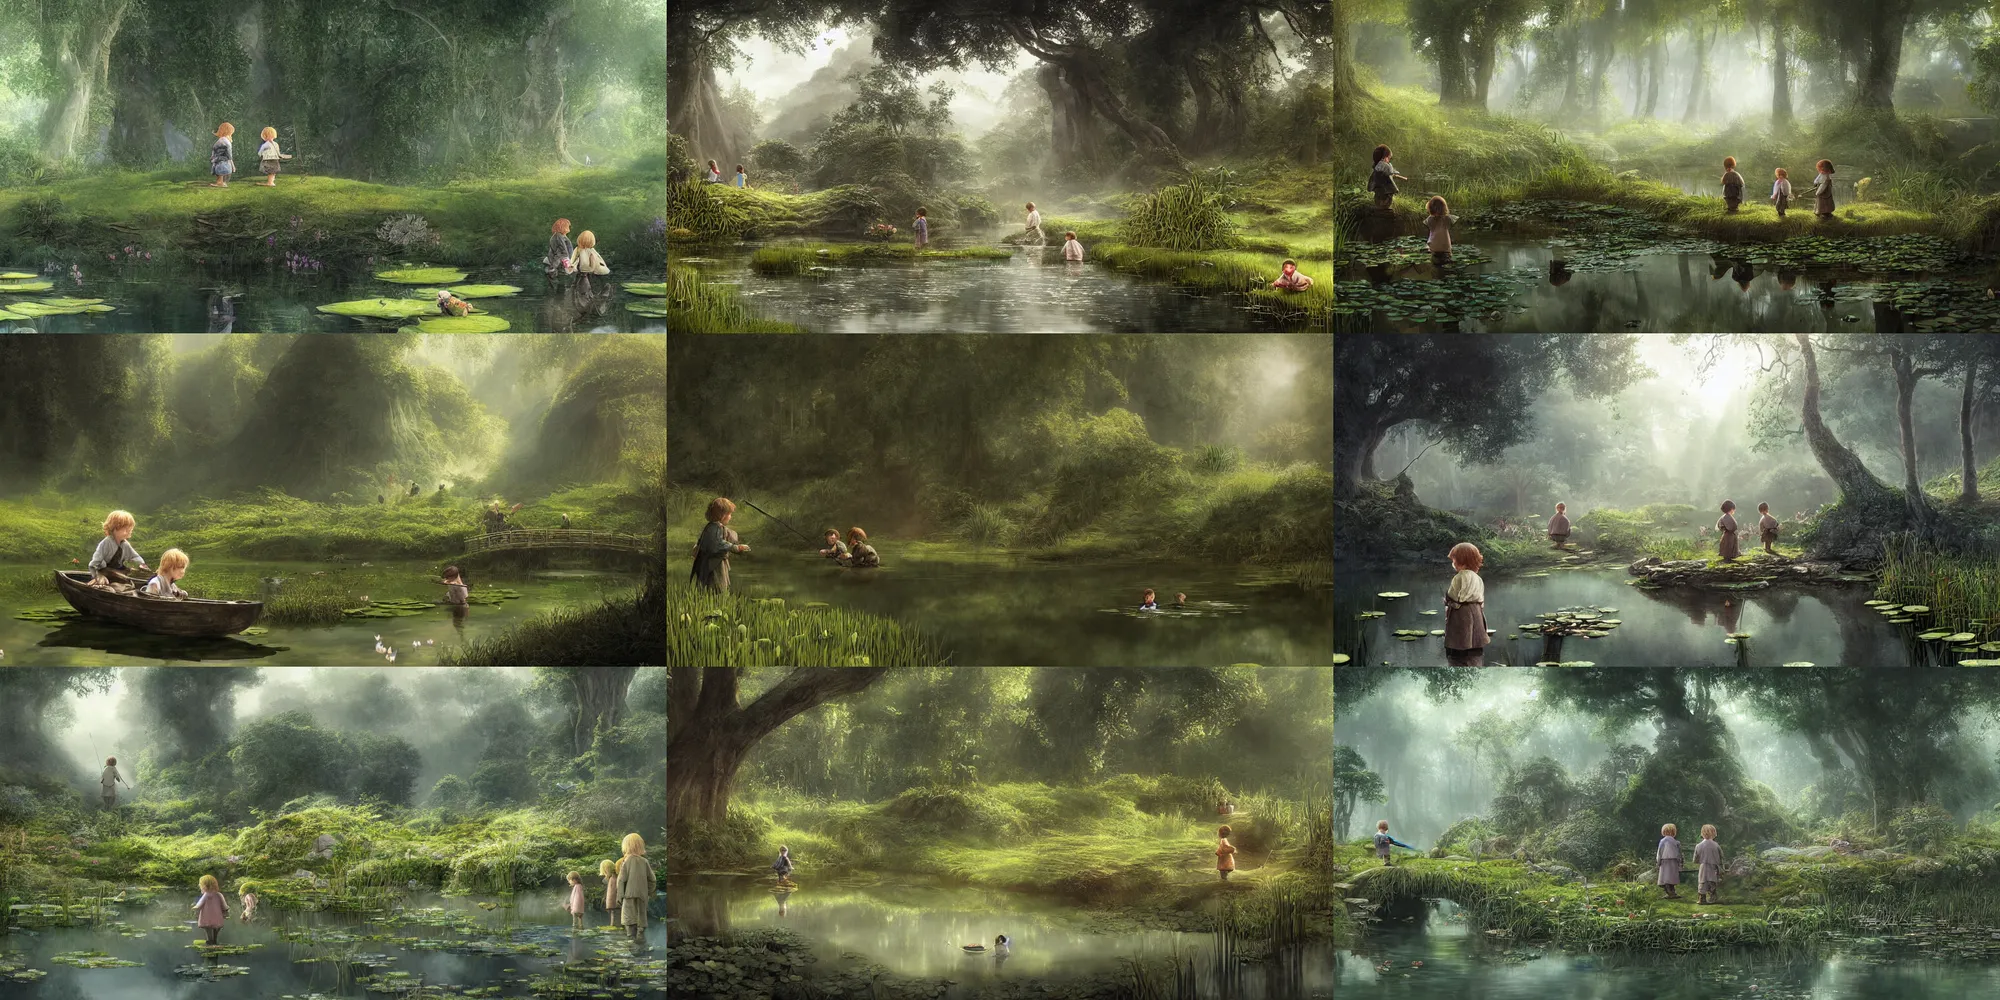 Prompt: two hobbit children fishing trip to a mirror - like pond covered with lotus flowers, by alan lee, dark foggy forest background, sunlight filtering through the trees, digital art, art station.